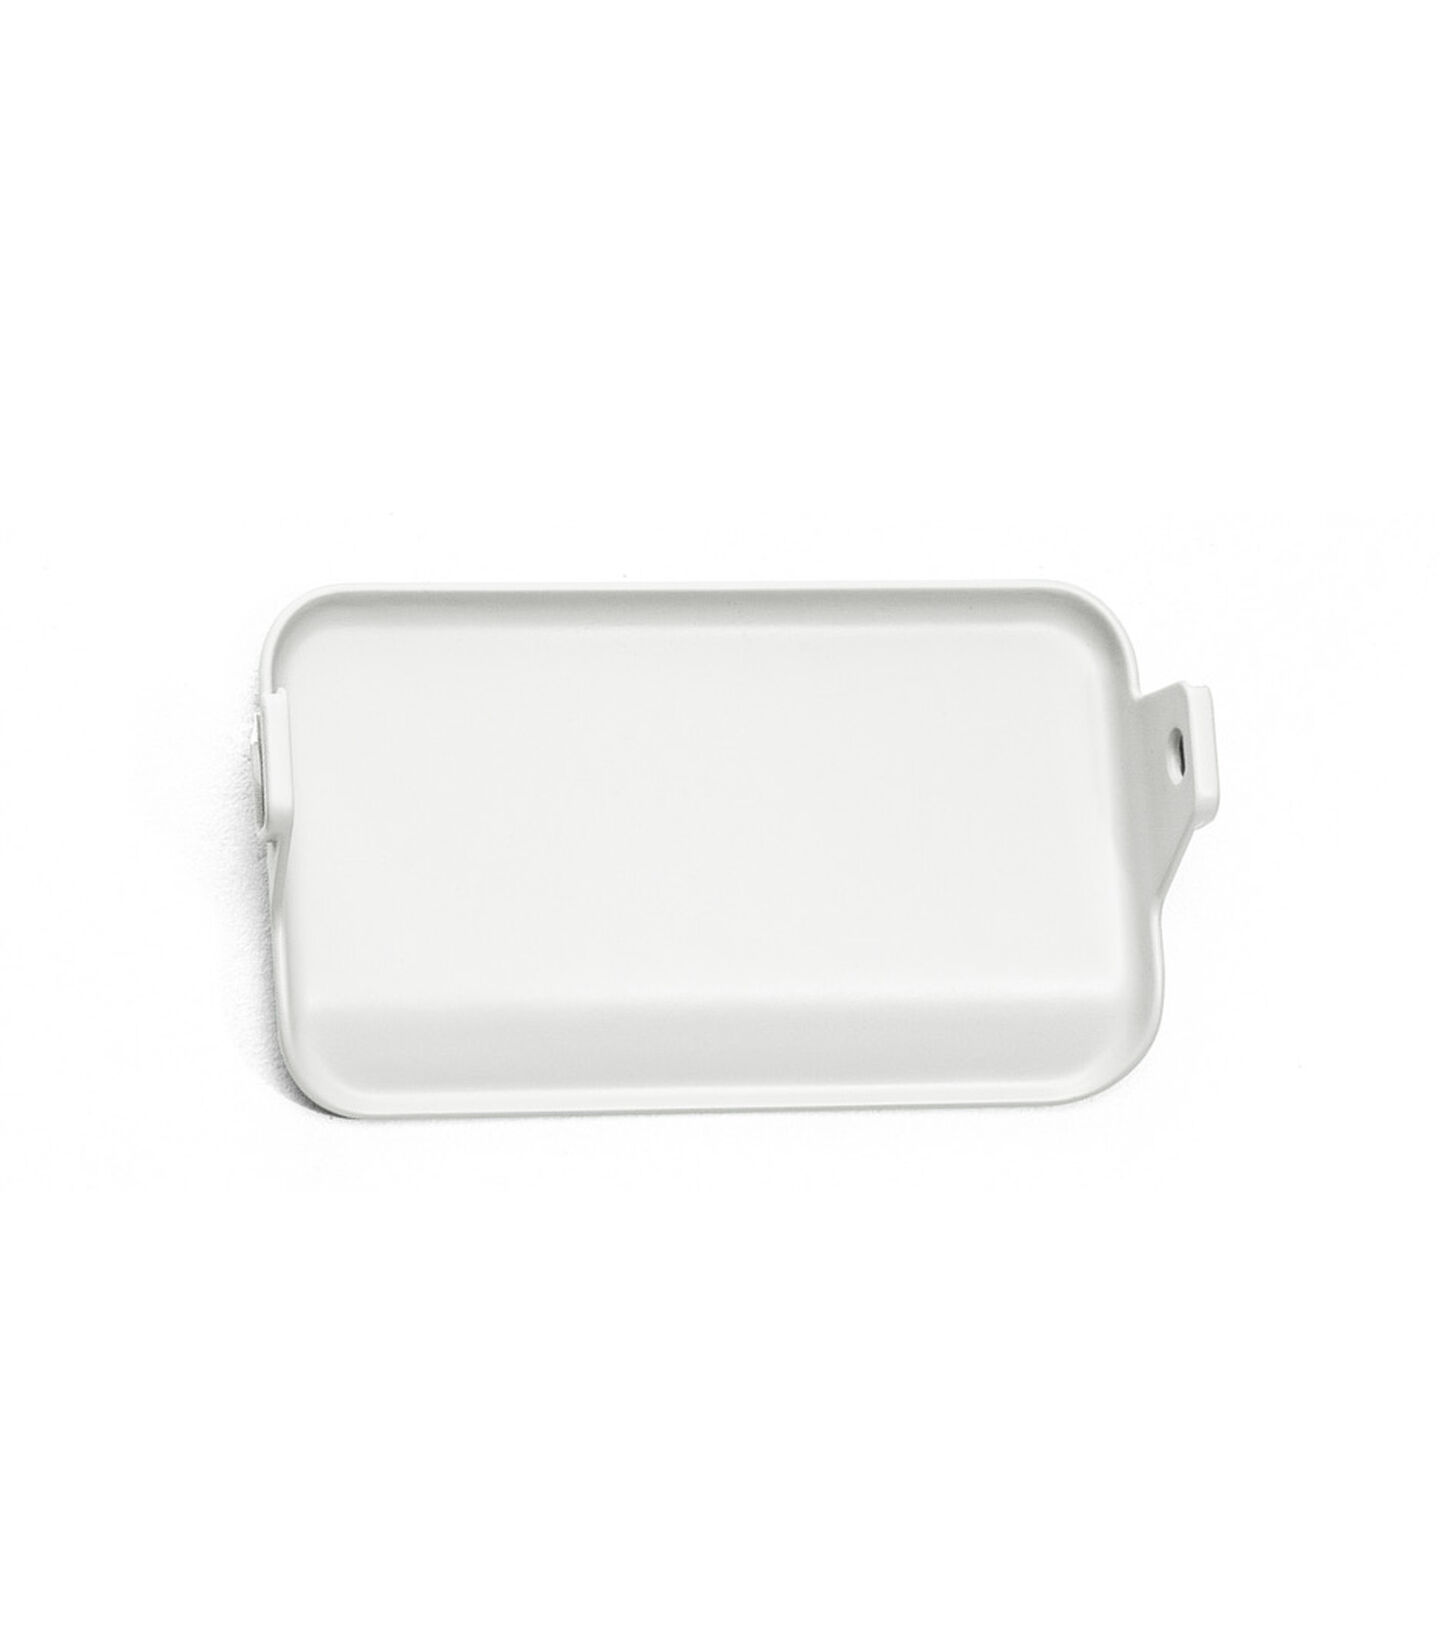 Stokke® Clikk™ Foot Plate in White. Available as Spare part. view 1